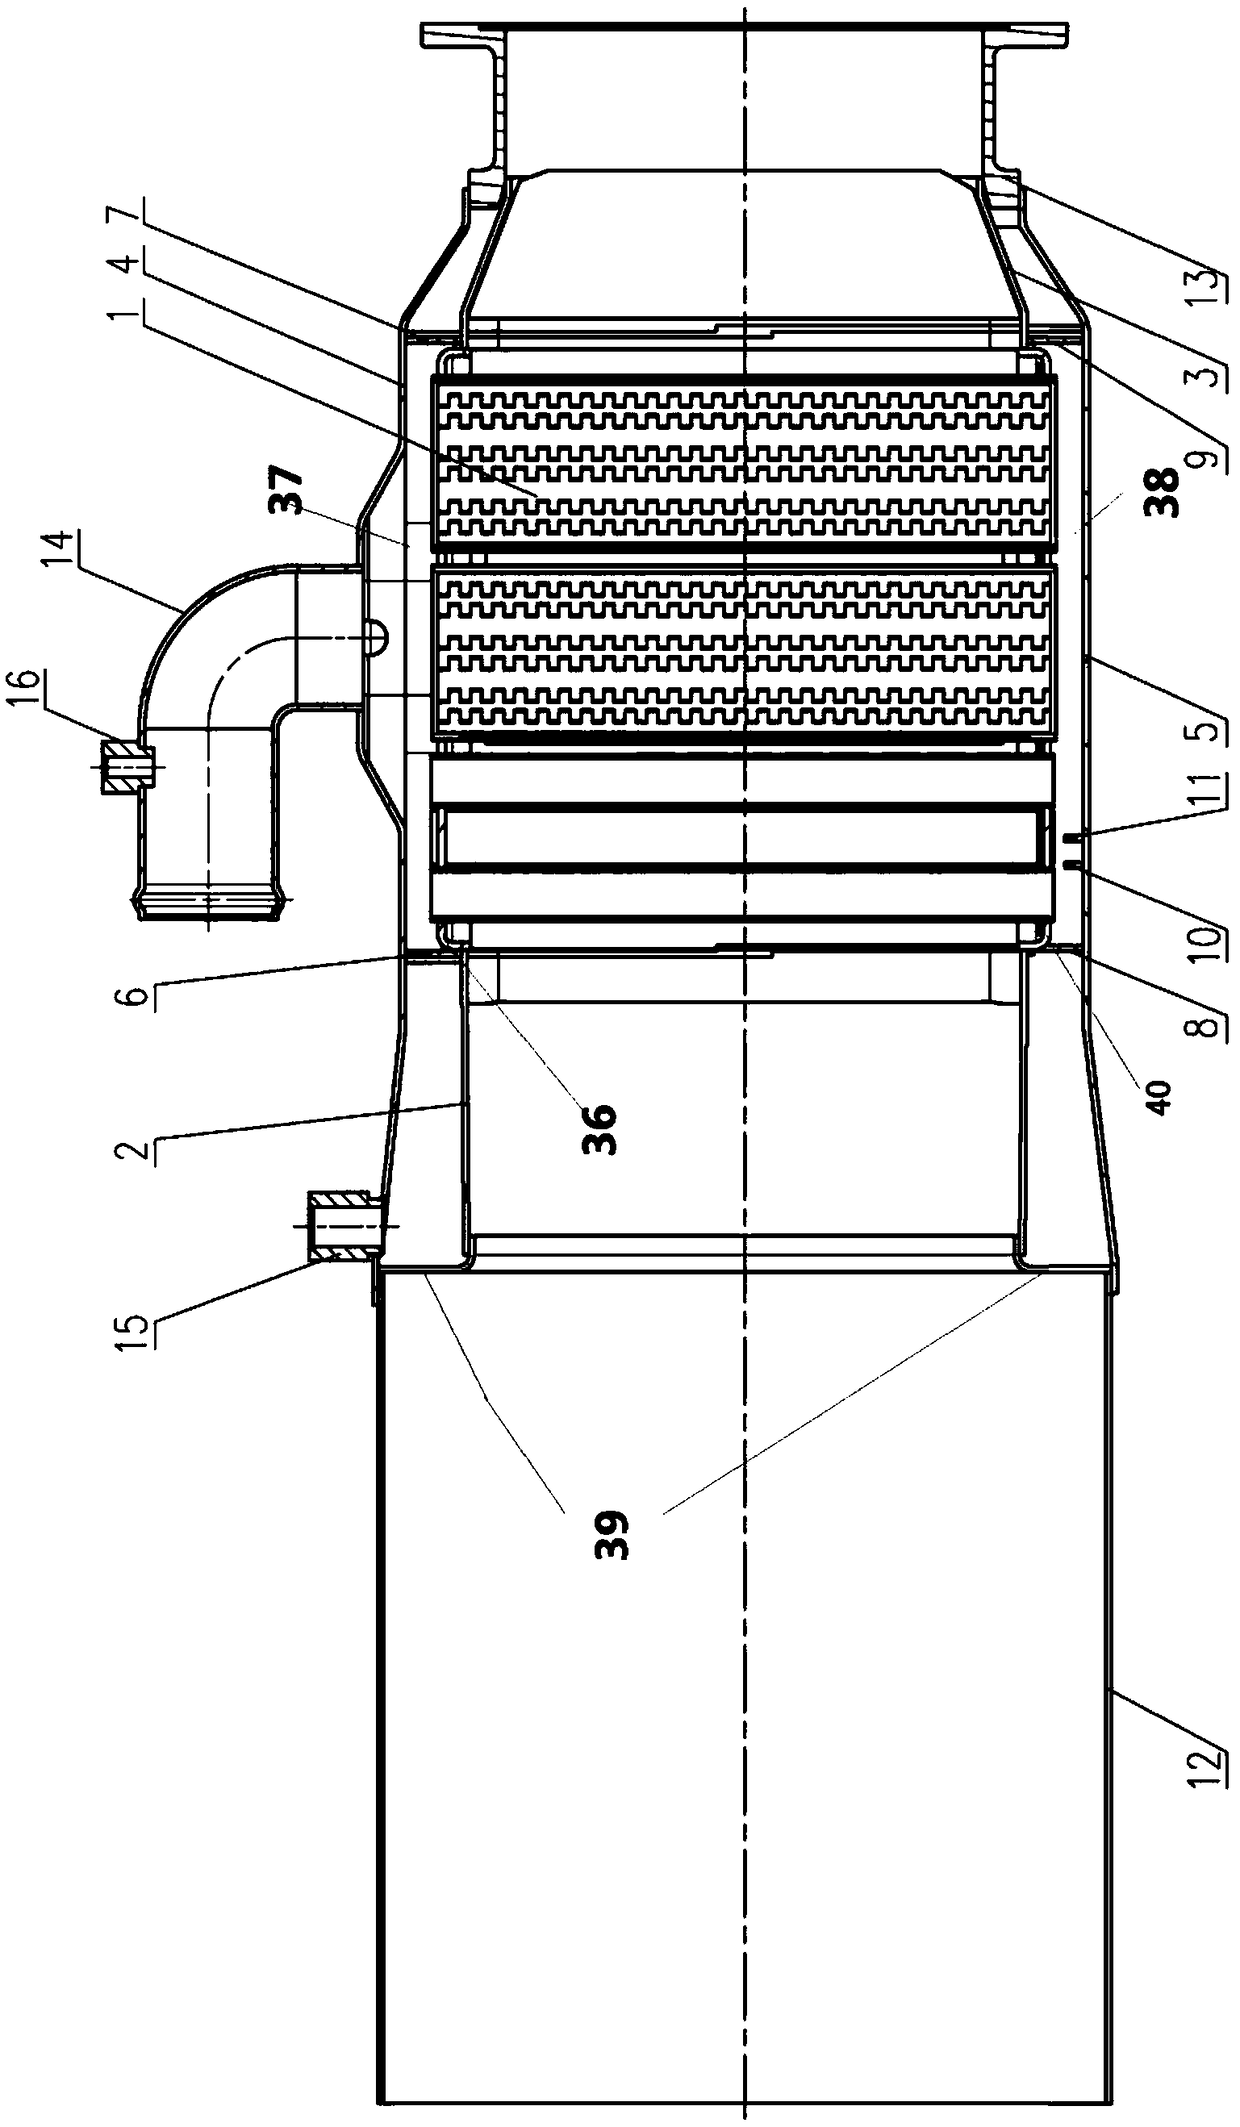 A heat exchange device for utilization of combustion waste heat with grid-distributed heat exchange structure